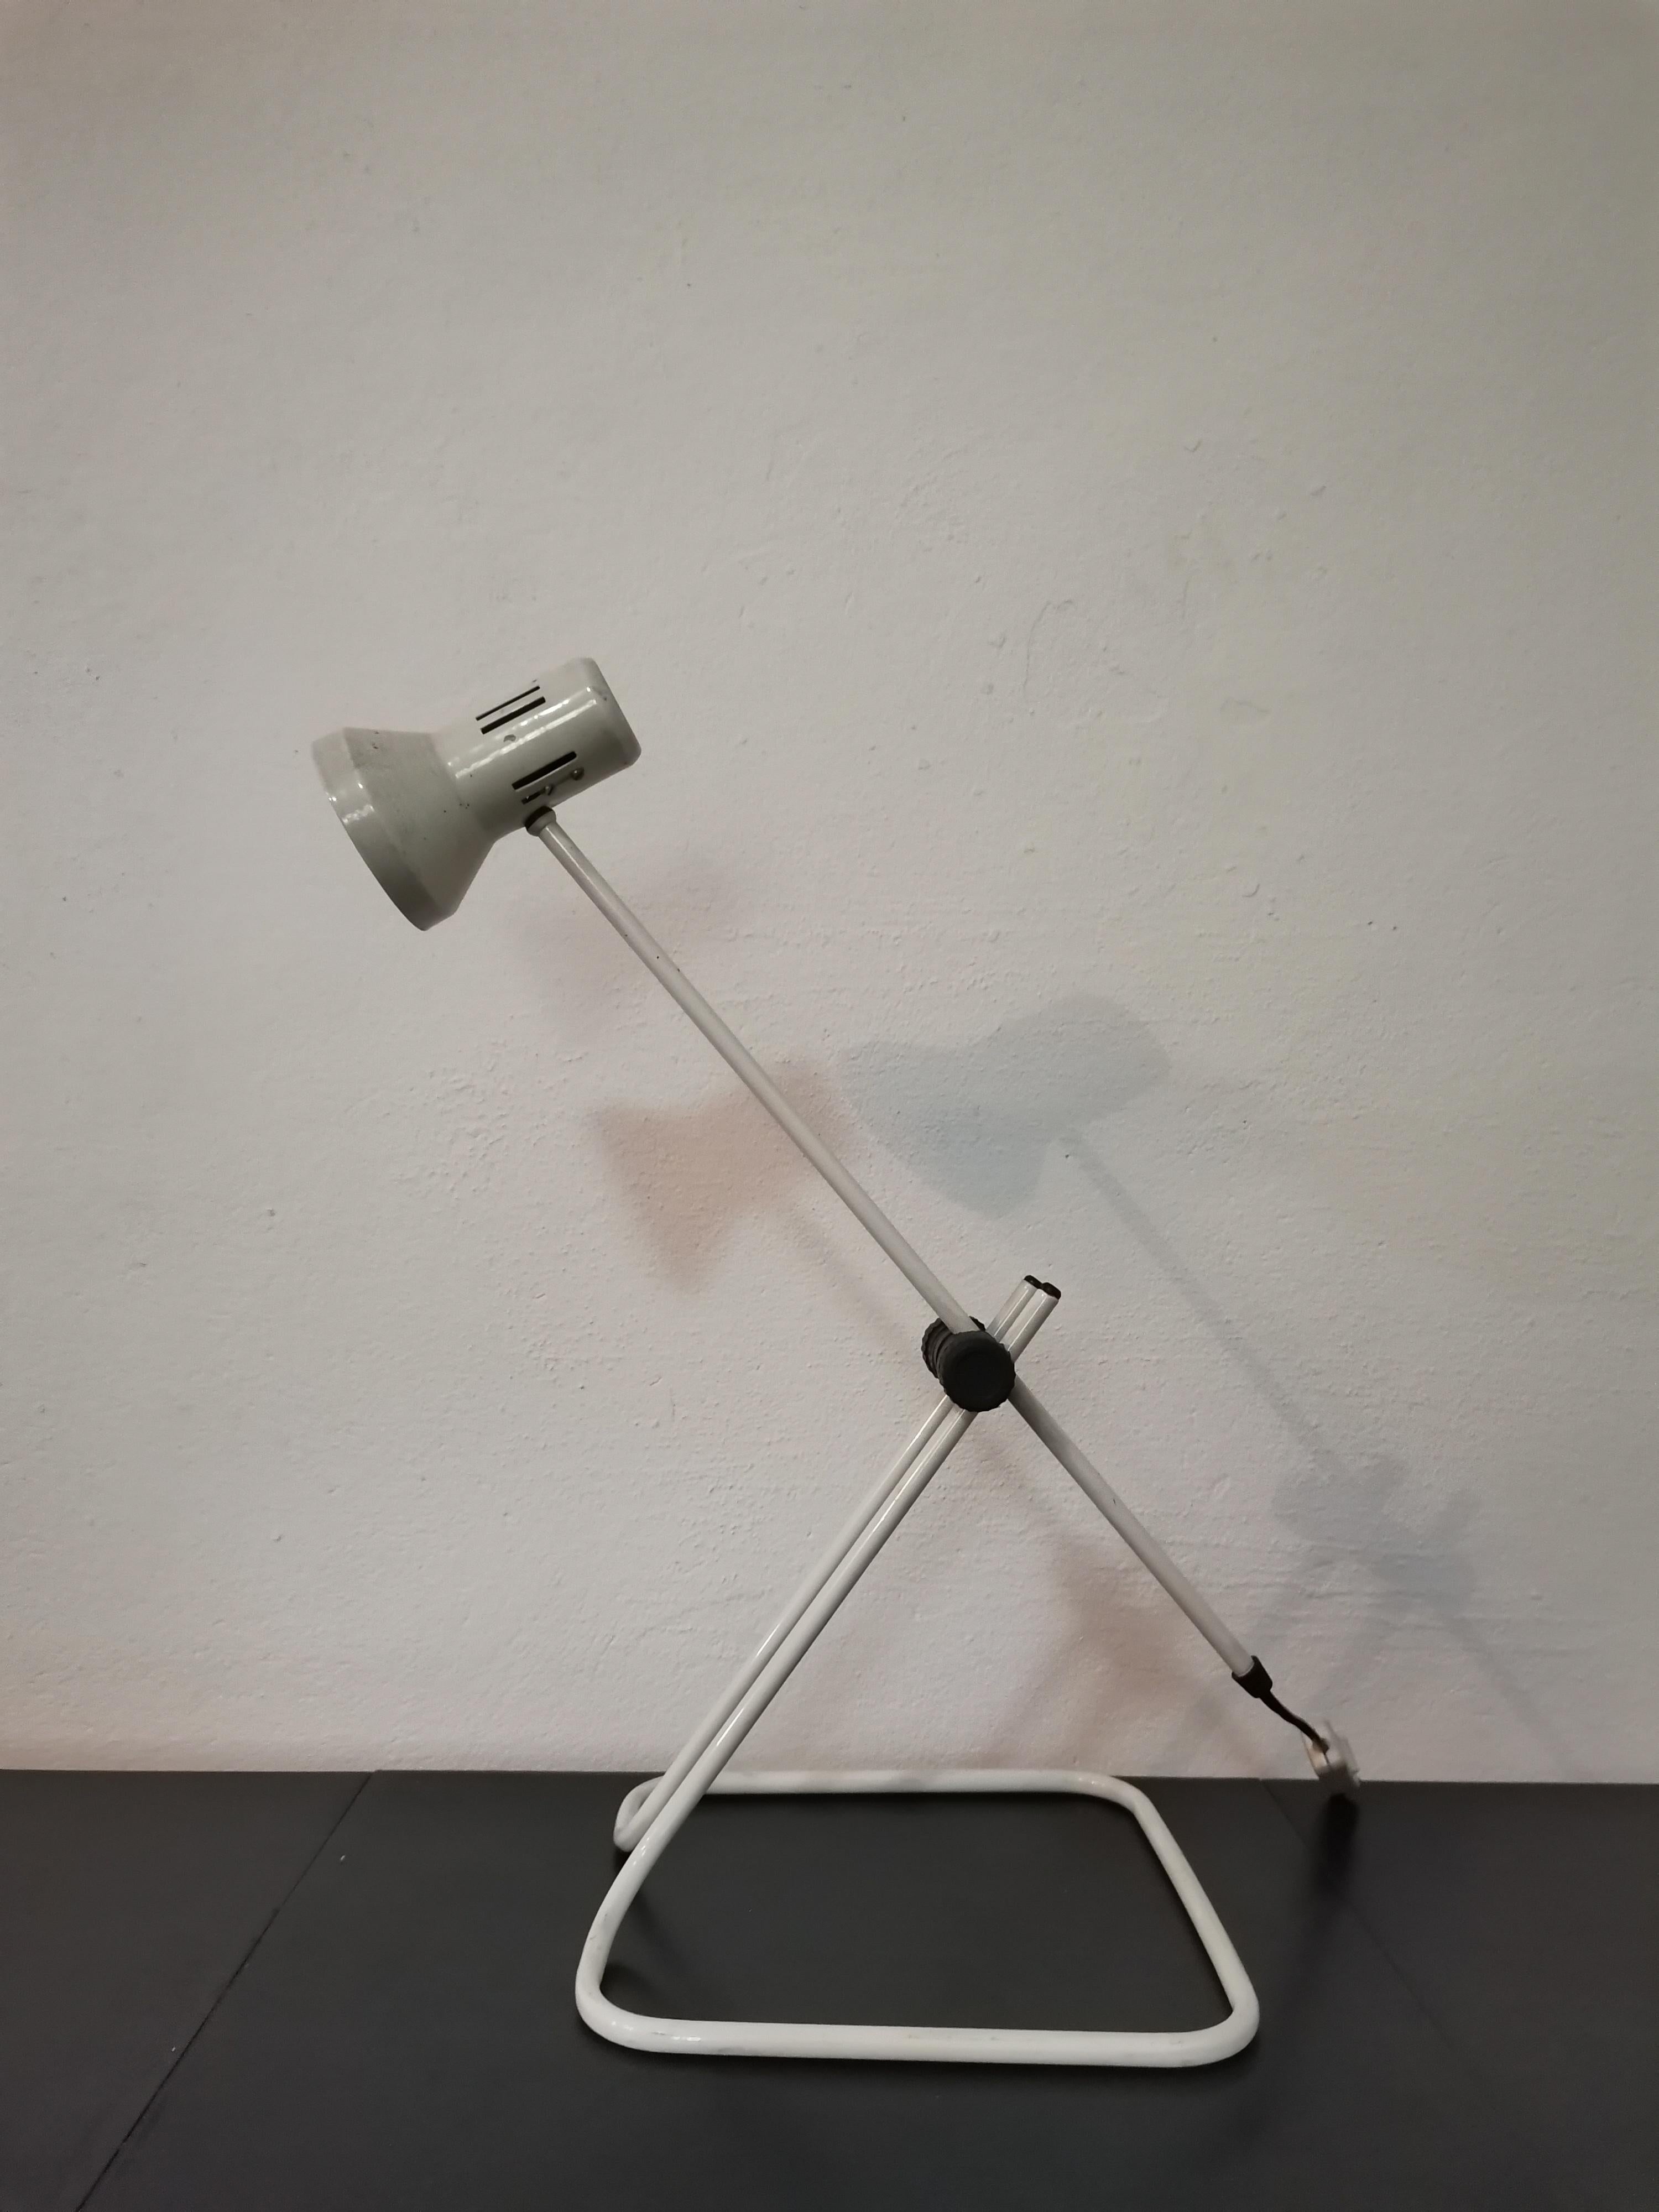 Desk Lamp/Table Lamp, 1970s

Period: 1970s

Style: midcentury modern design

Colour: white, black

Material: metal, plastic

Condition: original vintage condition with slight traces of use, fully finctional